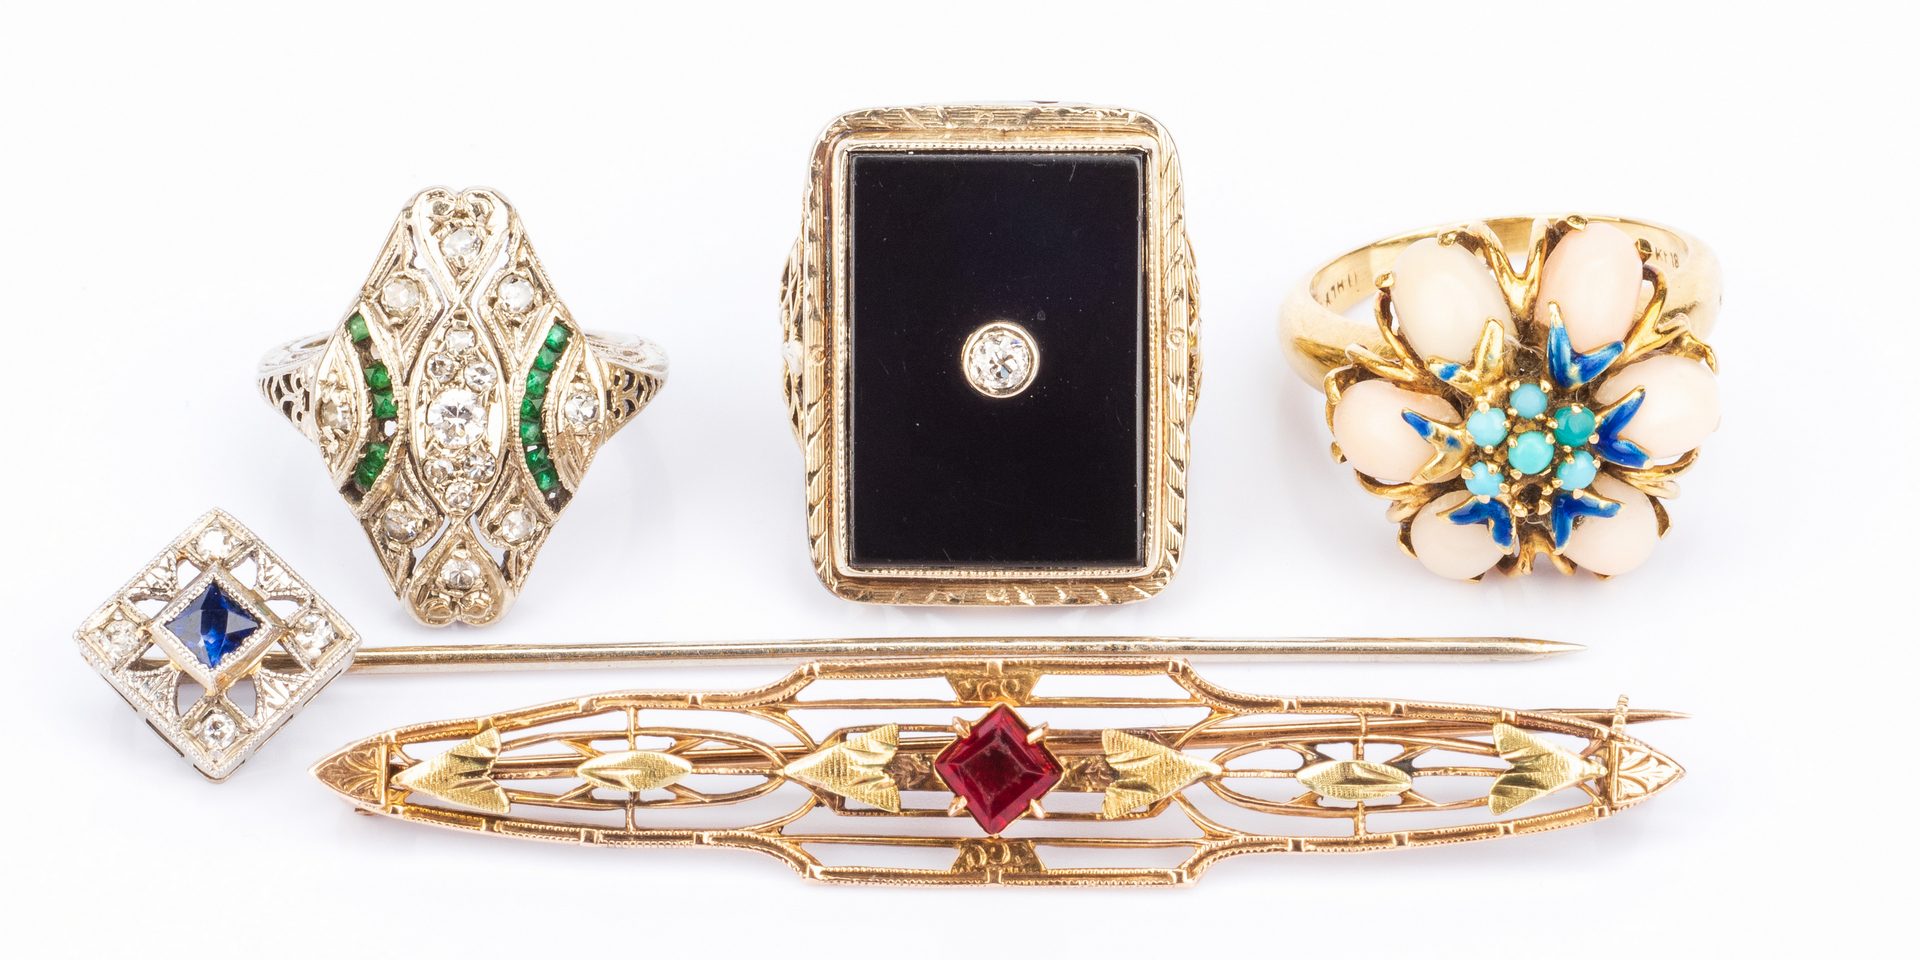 Lot 825: Group 6 Vintage Jewelry Items